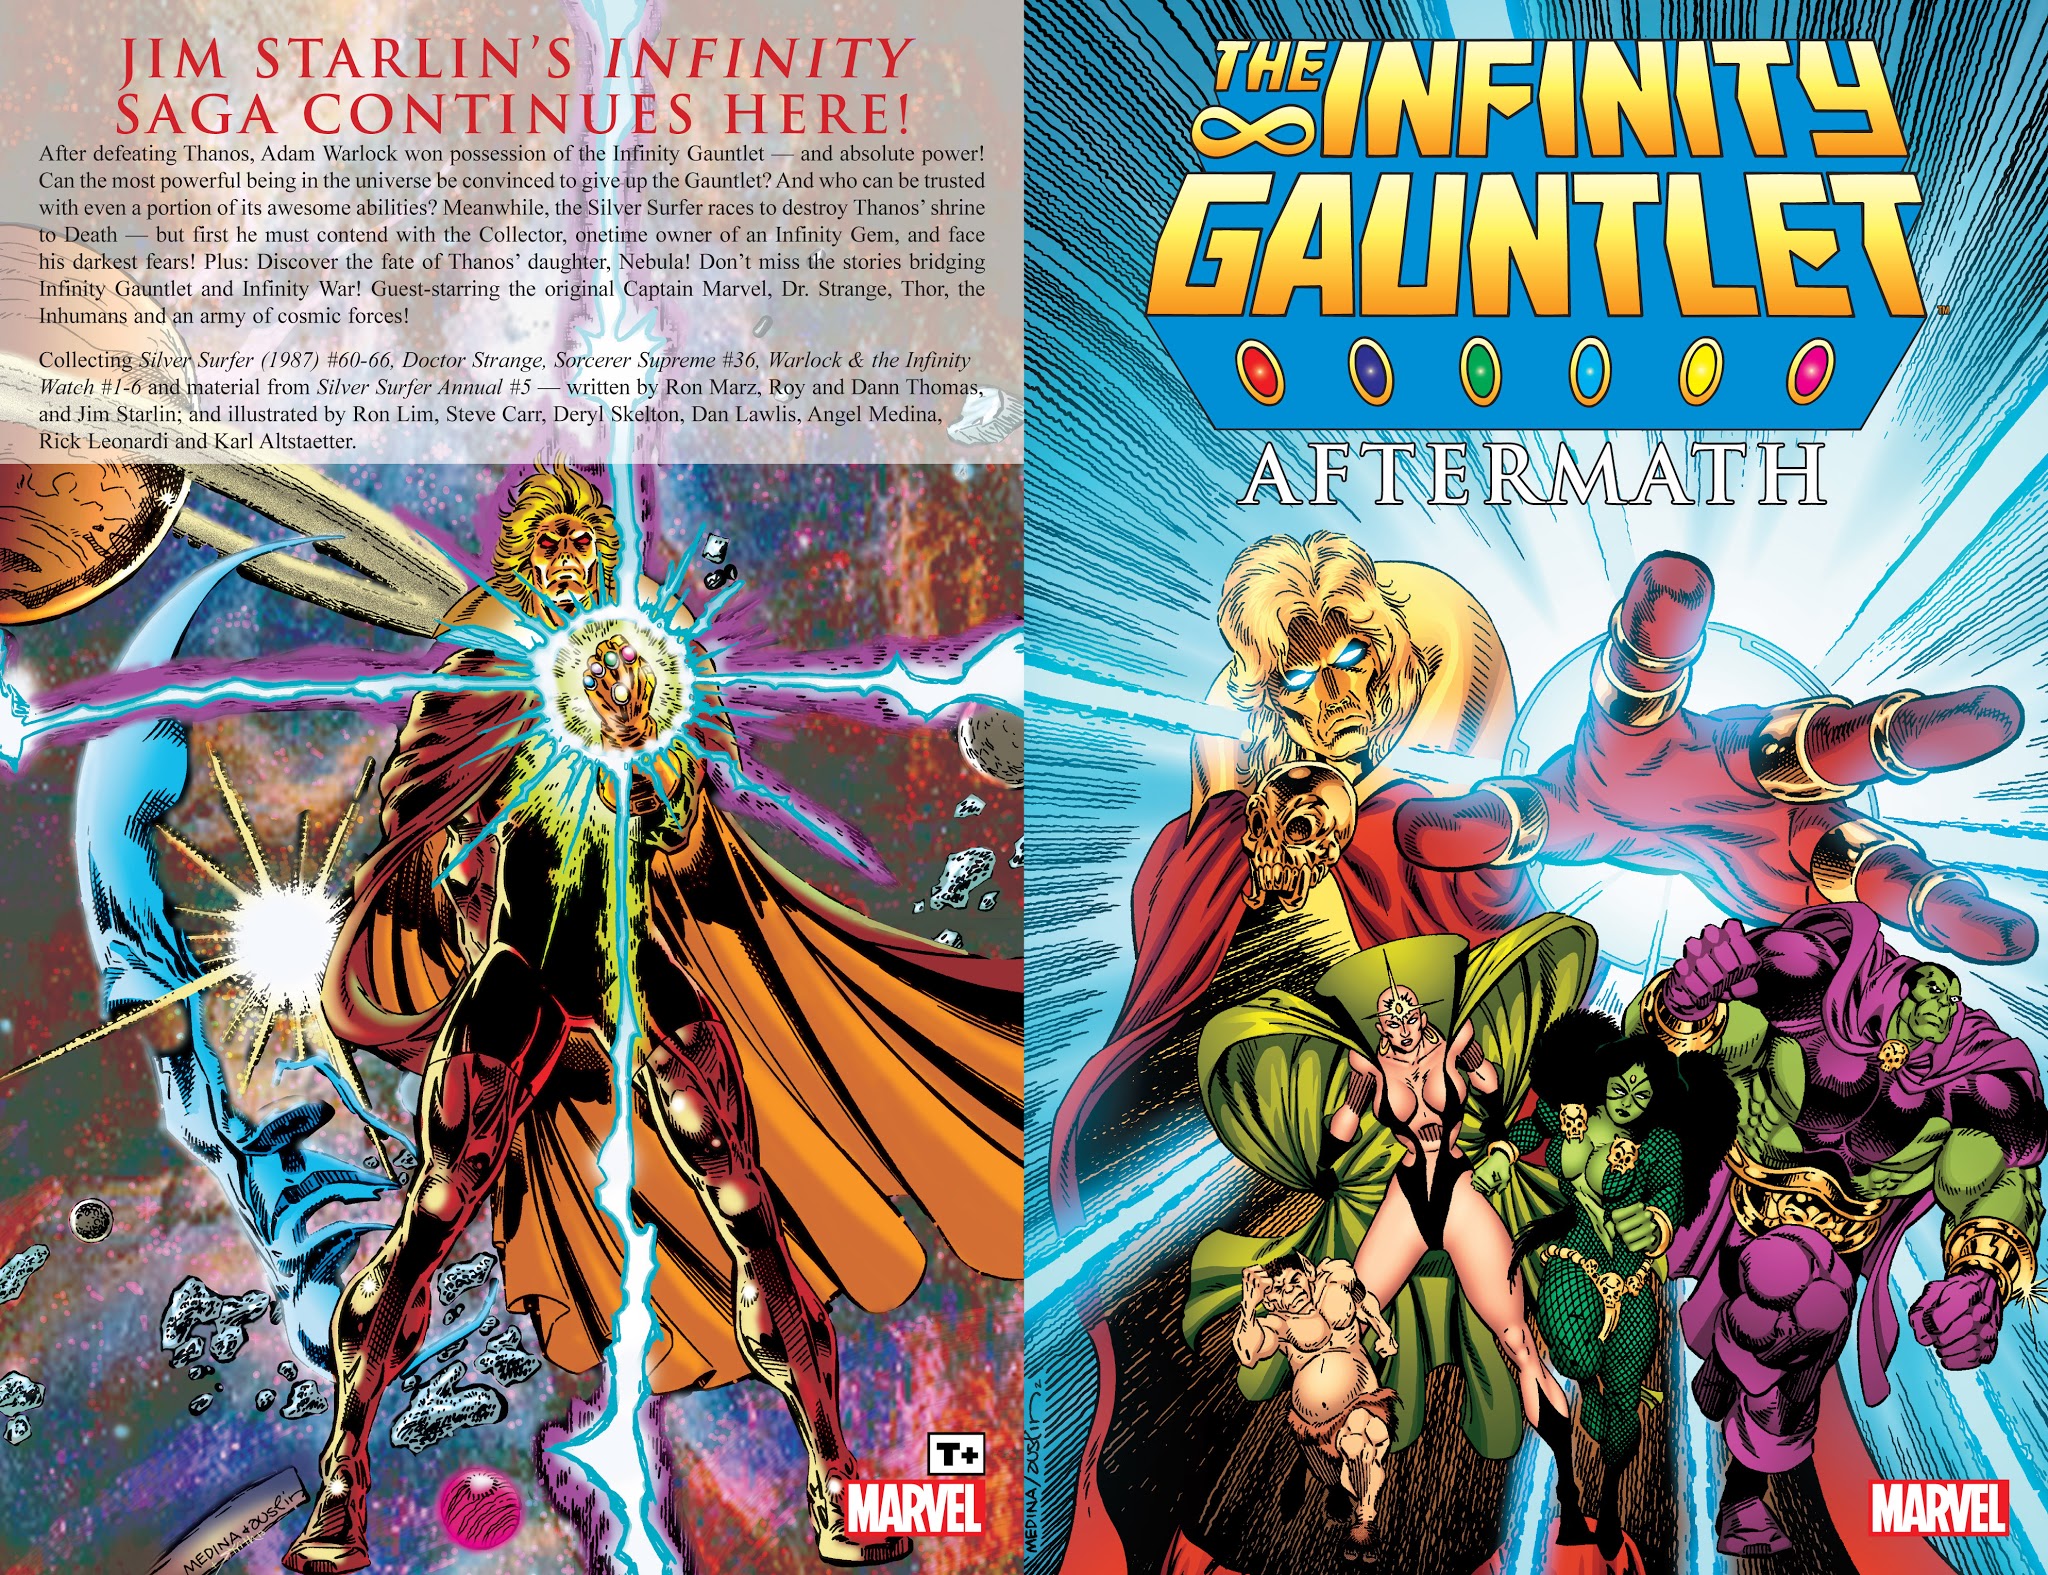 Read online Infinity Gauntlet Aftermath comic -  Issue # TPB - 2